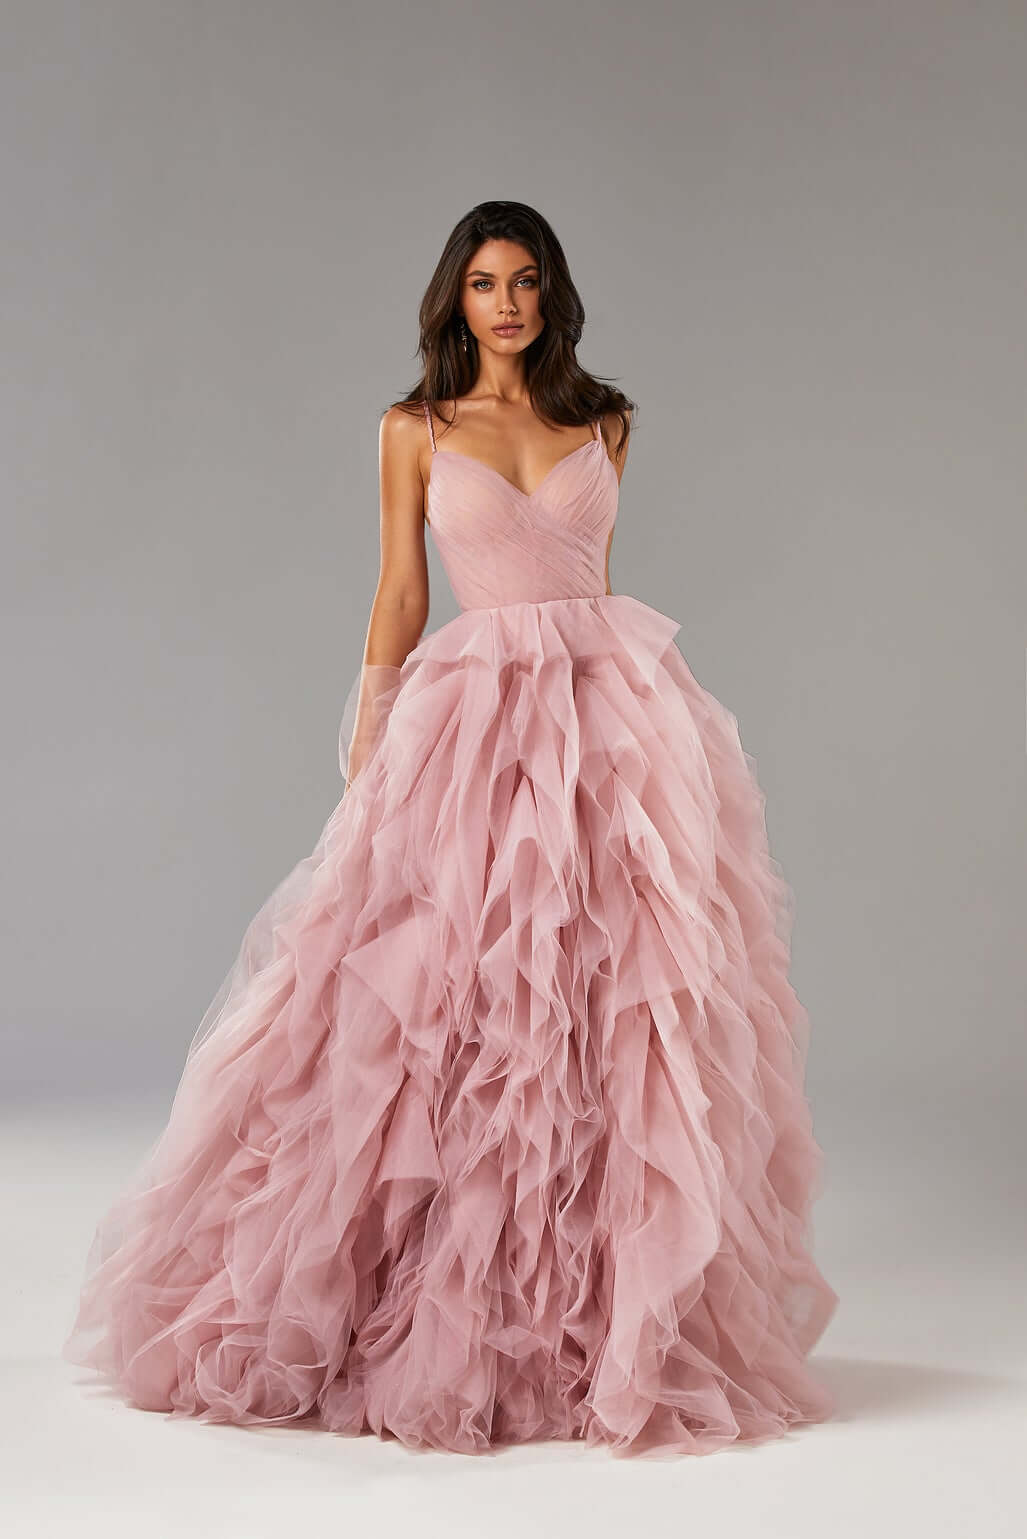 Milla Dramatically Flowered Tulle Dress in Misty Pink M / Misty Rose